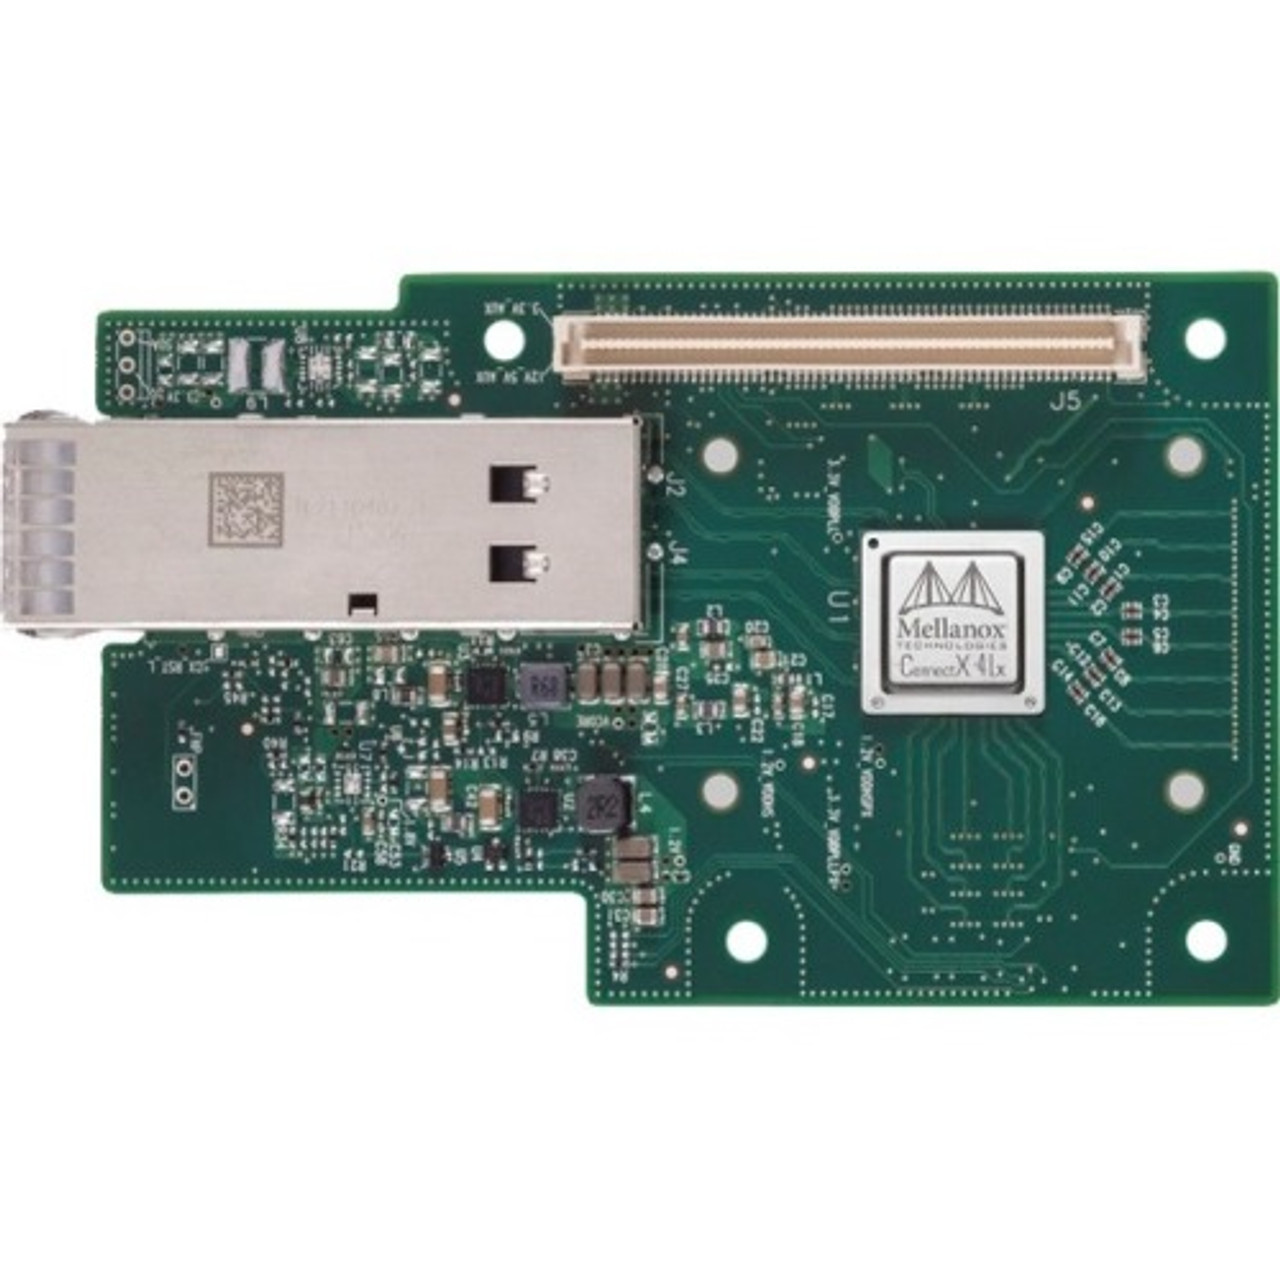 MCX4431M-GCAN Mellanox Connectx-4 Lx En Network Interface Card For Ocp With Multi-Host And Host Management, 50gbe Single-Port Qsfp28, Pcie3.0 X8, No Bracket, Rohs